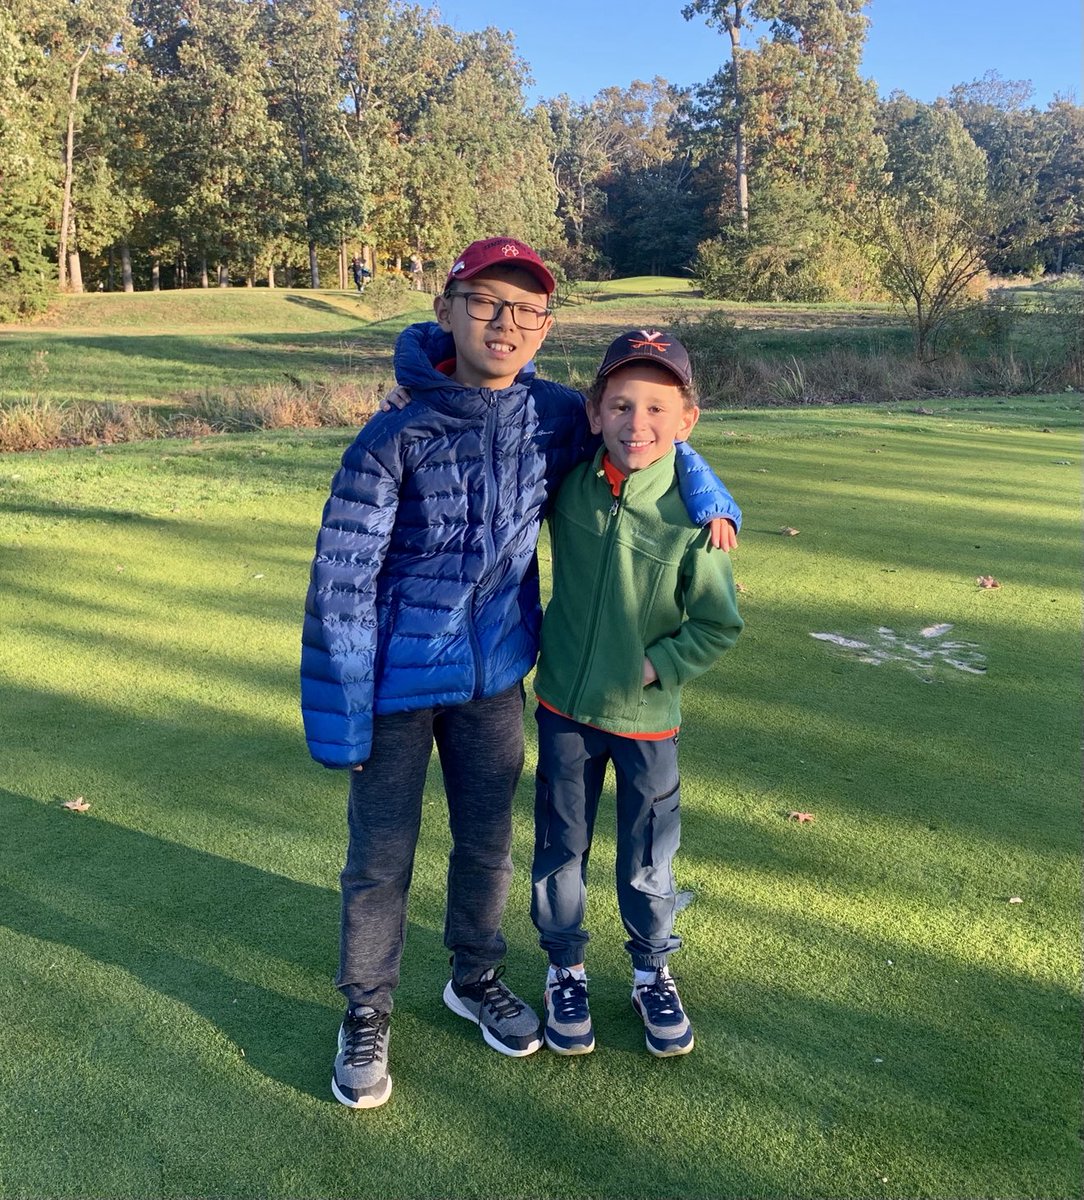 Operation 36 Golf

Congratulations to Josiah (left) on  making his first birdie as a new golfer! And to Alex (right) on scoring 3 under par in his last 4 holes with 2 birdies!

#operation36 #juniorgolf